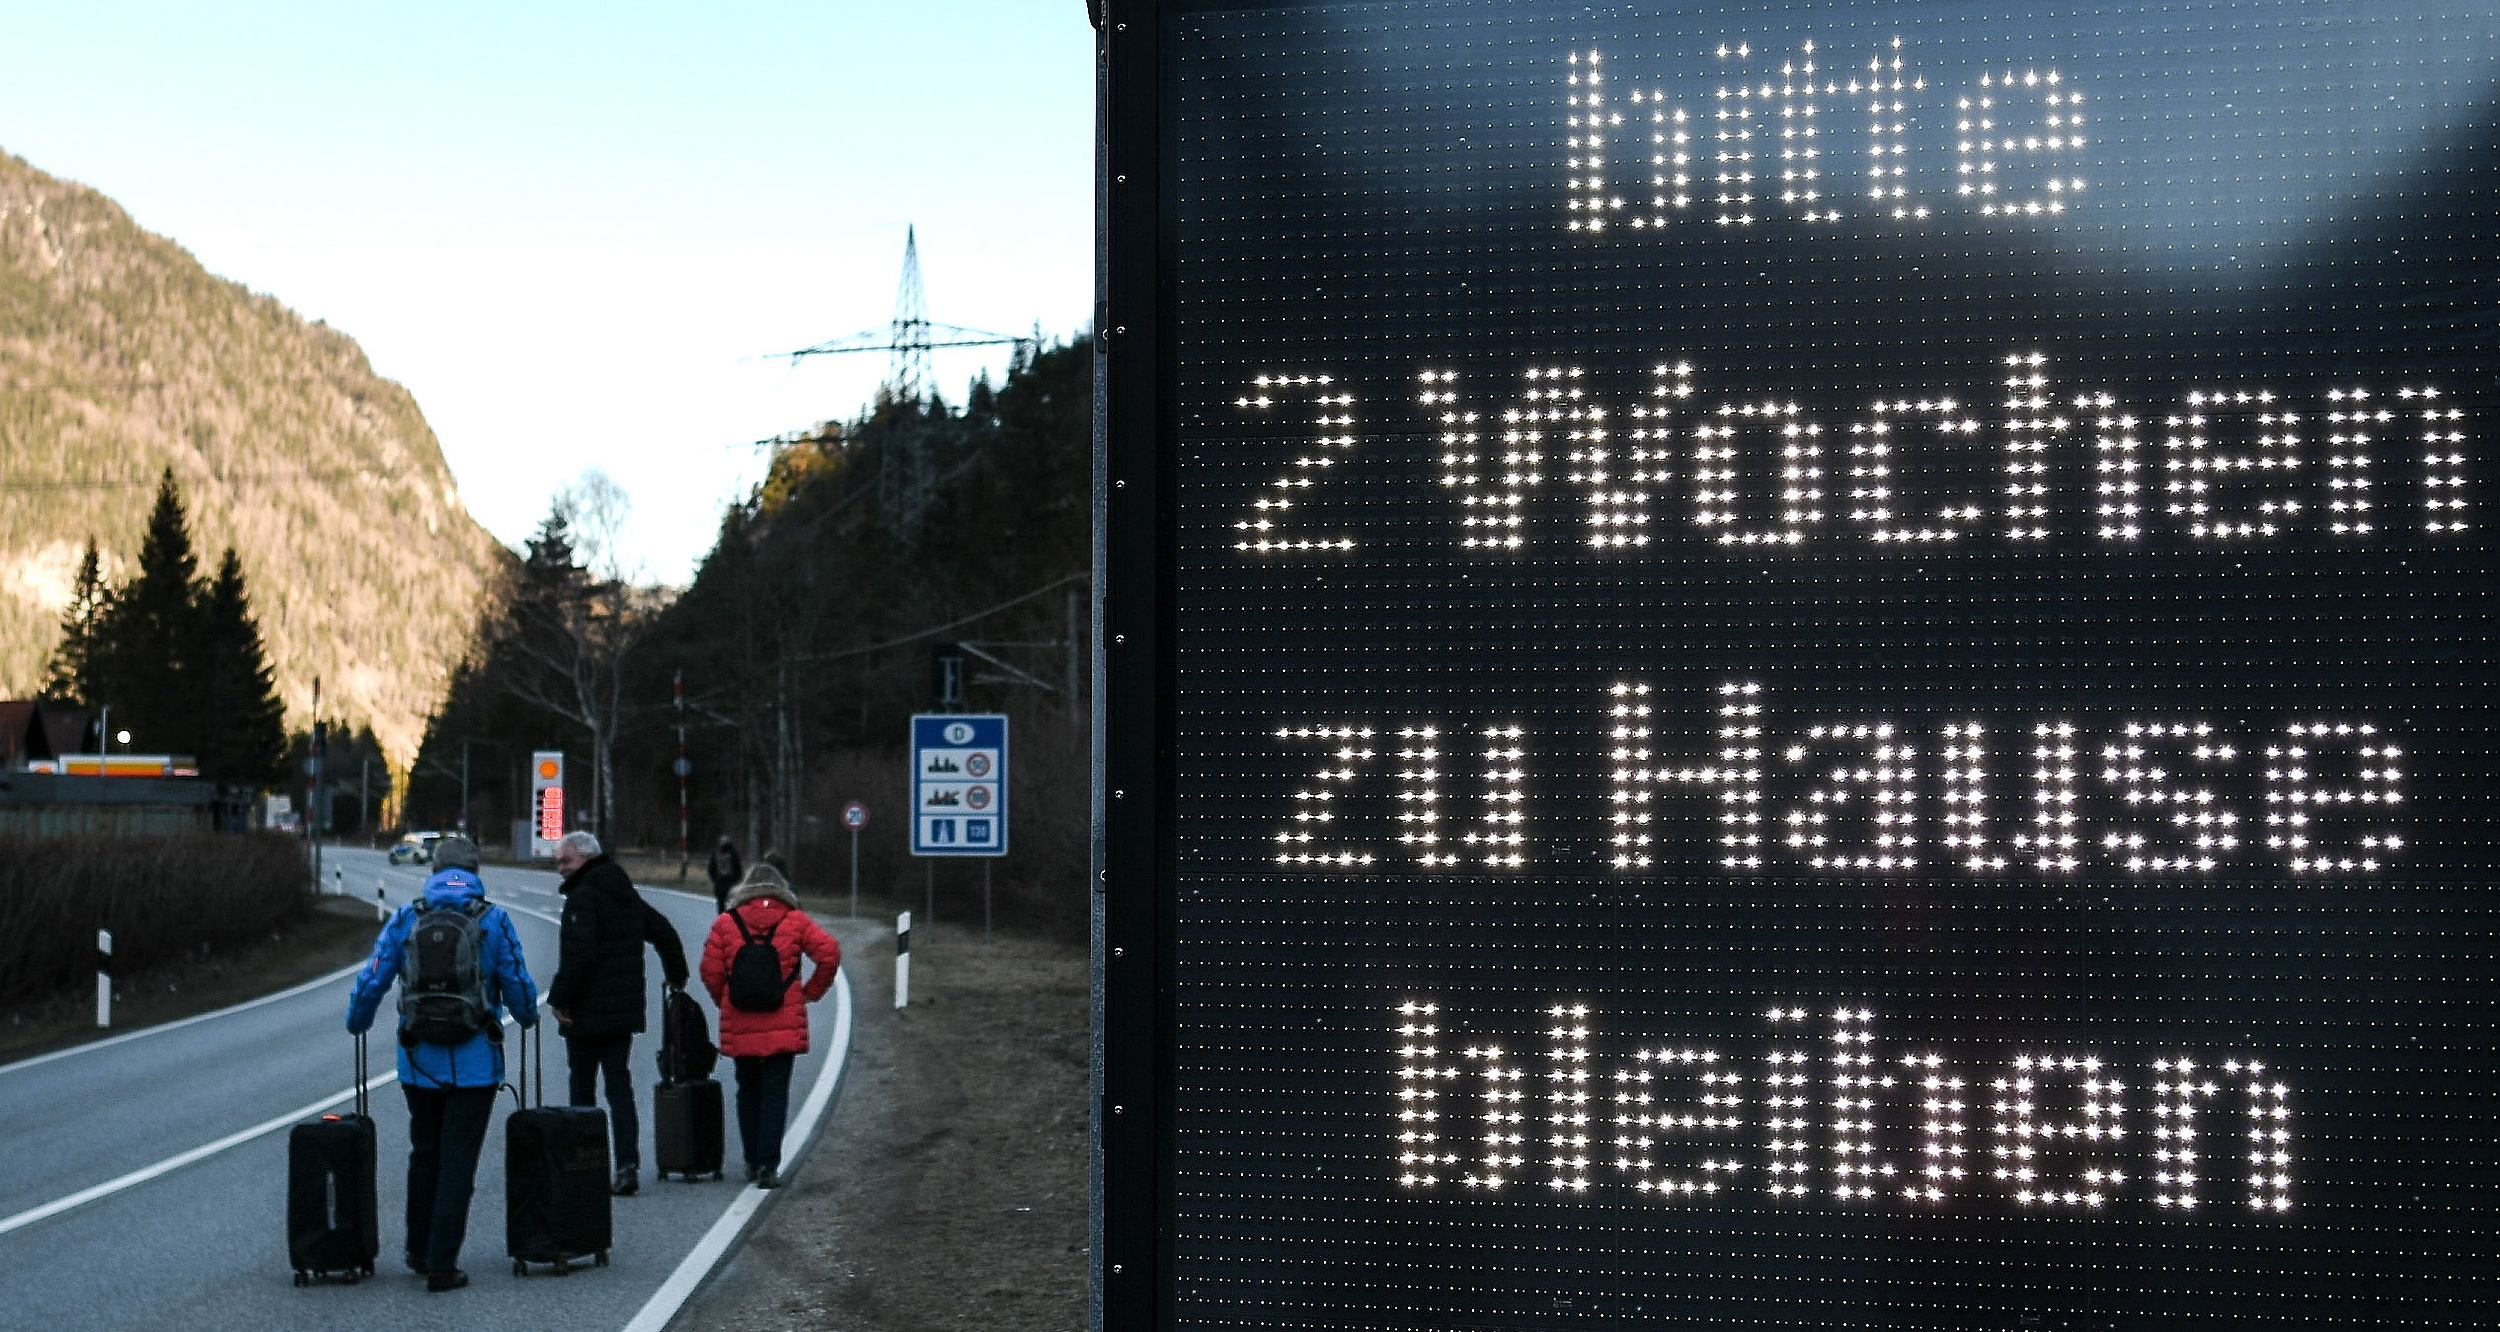 epa08418768 (FILE) - A group of tourists walks past a warning sign reading 'Please stay at home for two weeks', at the border between Germany and Austria, in Scharnitz, Germany, 16 March 2020 (reissued 13 May 2020). Media reports state on 13 May 2020 that Germany is planning to partially ease border controls as early as 16 May 2020, following a decision of the Cabinet. At the same time, Austria is planning to reopen the border with Germany as early as 15 June, media added.  EPA/PHILIPP GUELLAND *** Local Caption *** 55955912